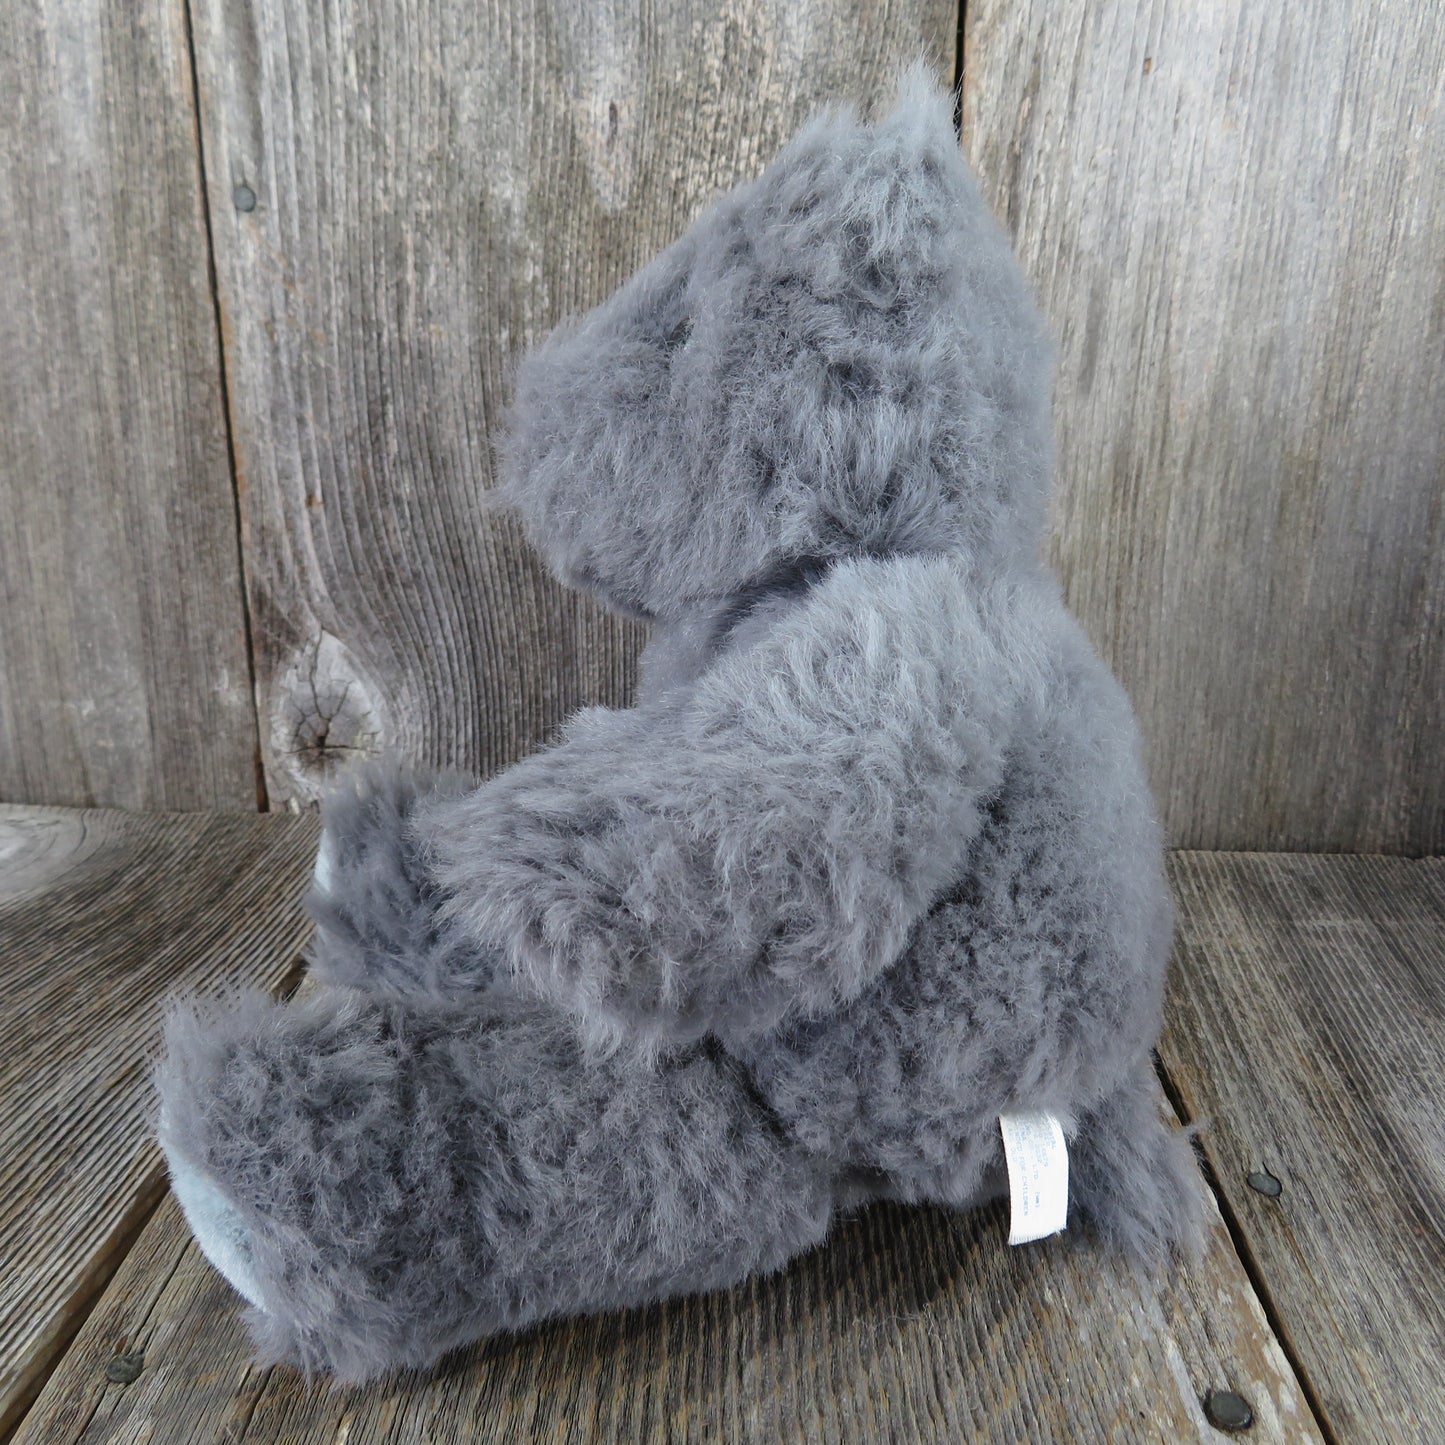 Vintage Teddy Bear Plush Fuzzy Stuffed Animal Grey Stitched Pink Nose Gray Blue Feet Mouse TB Trading